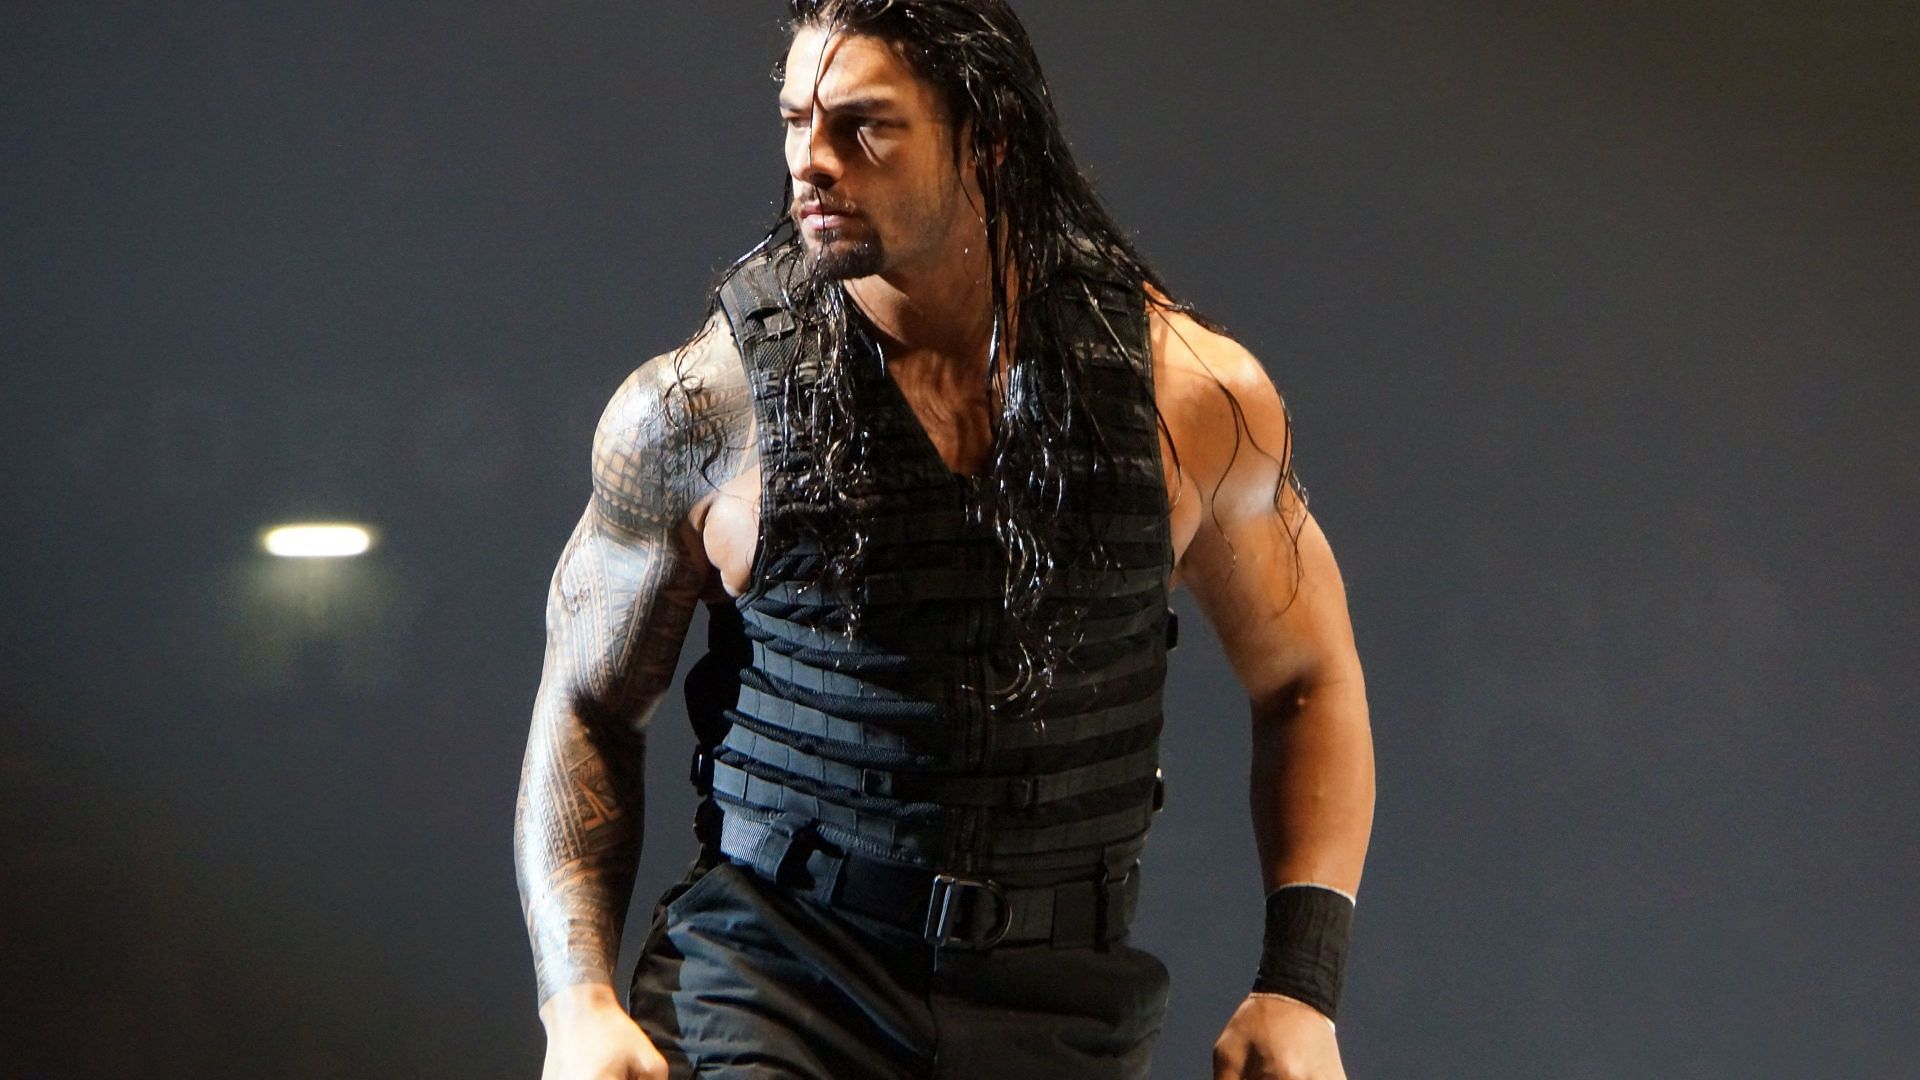 Acknowledge the Tribal Chief, Roman Reigns.